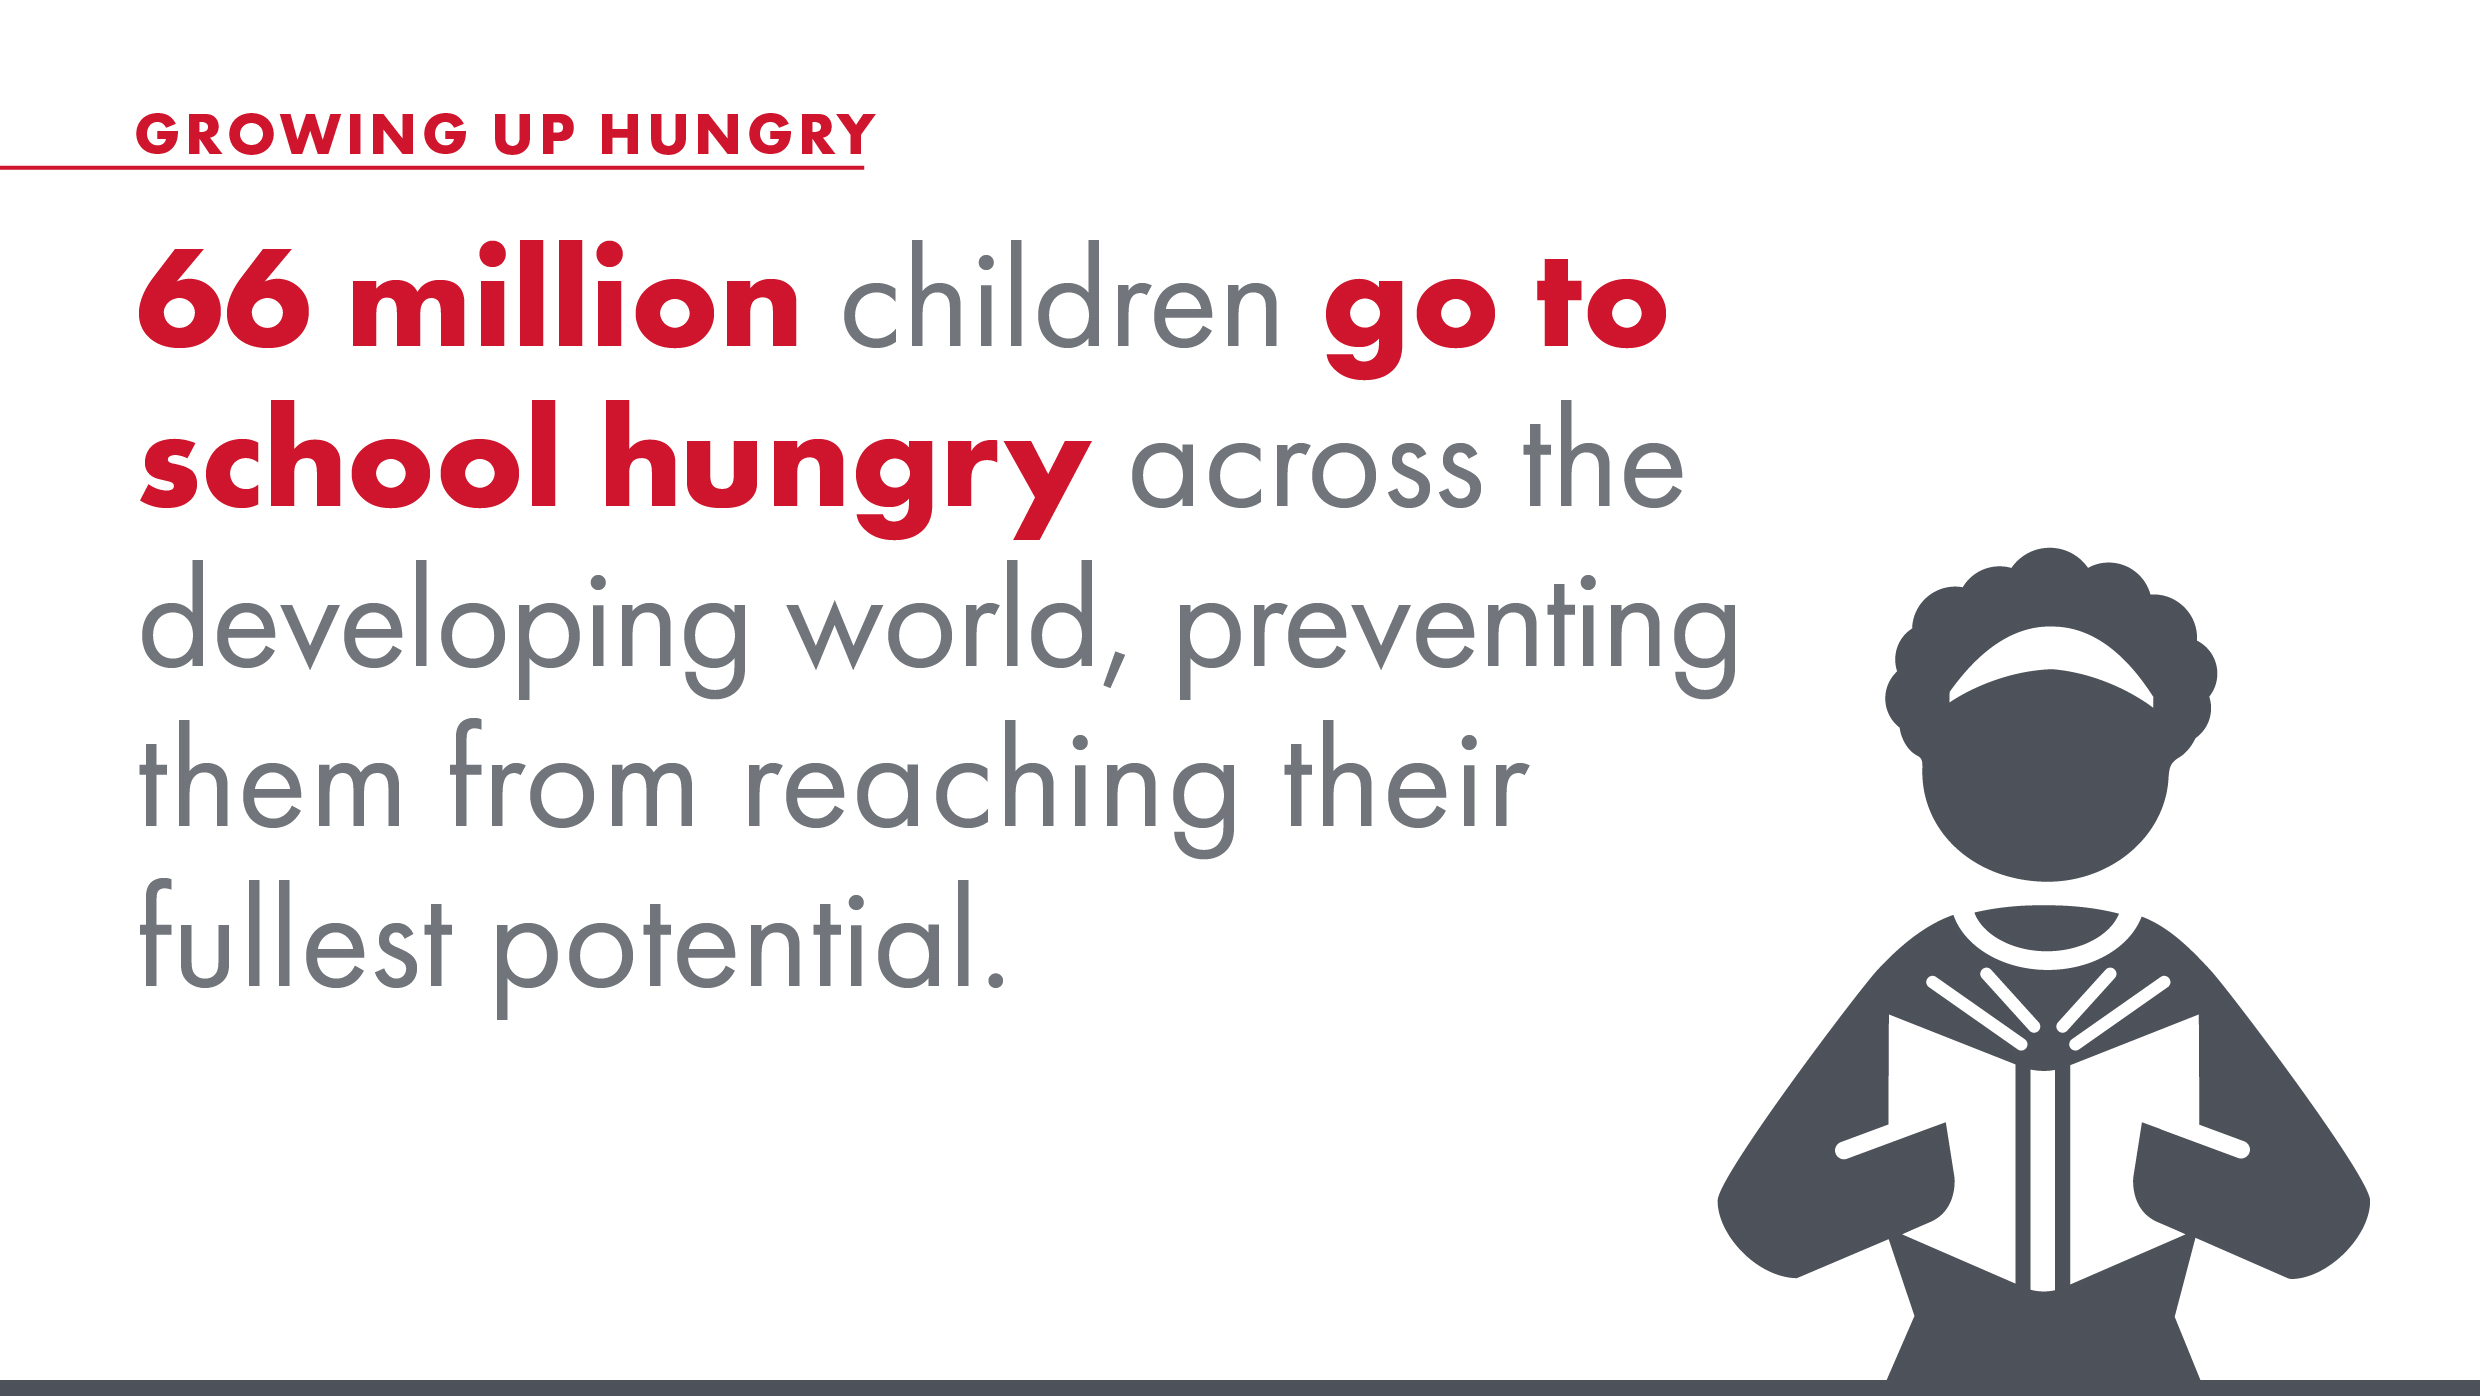 66 million children go to school hungry across the developing world, preventing them from reaching their fullest potential.